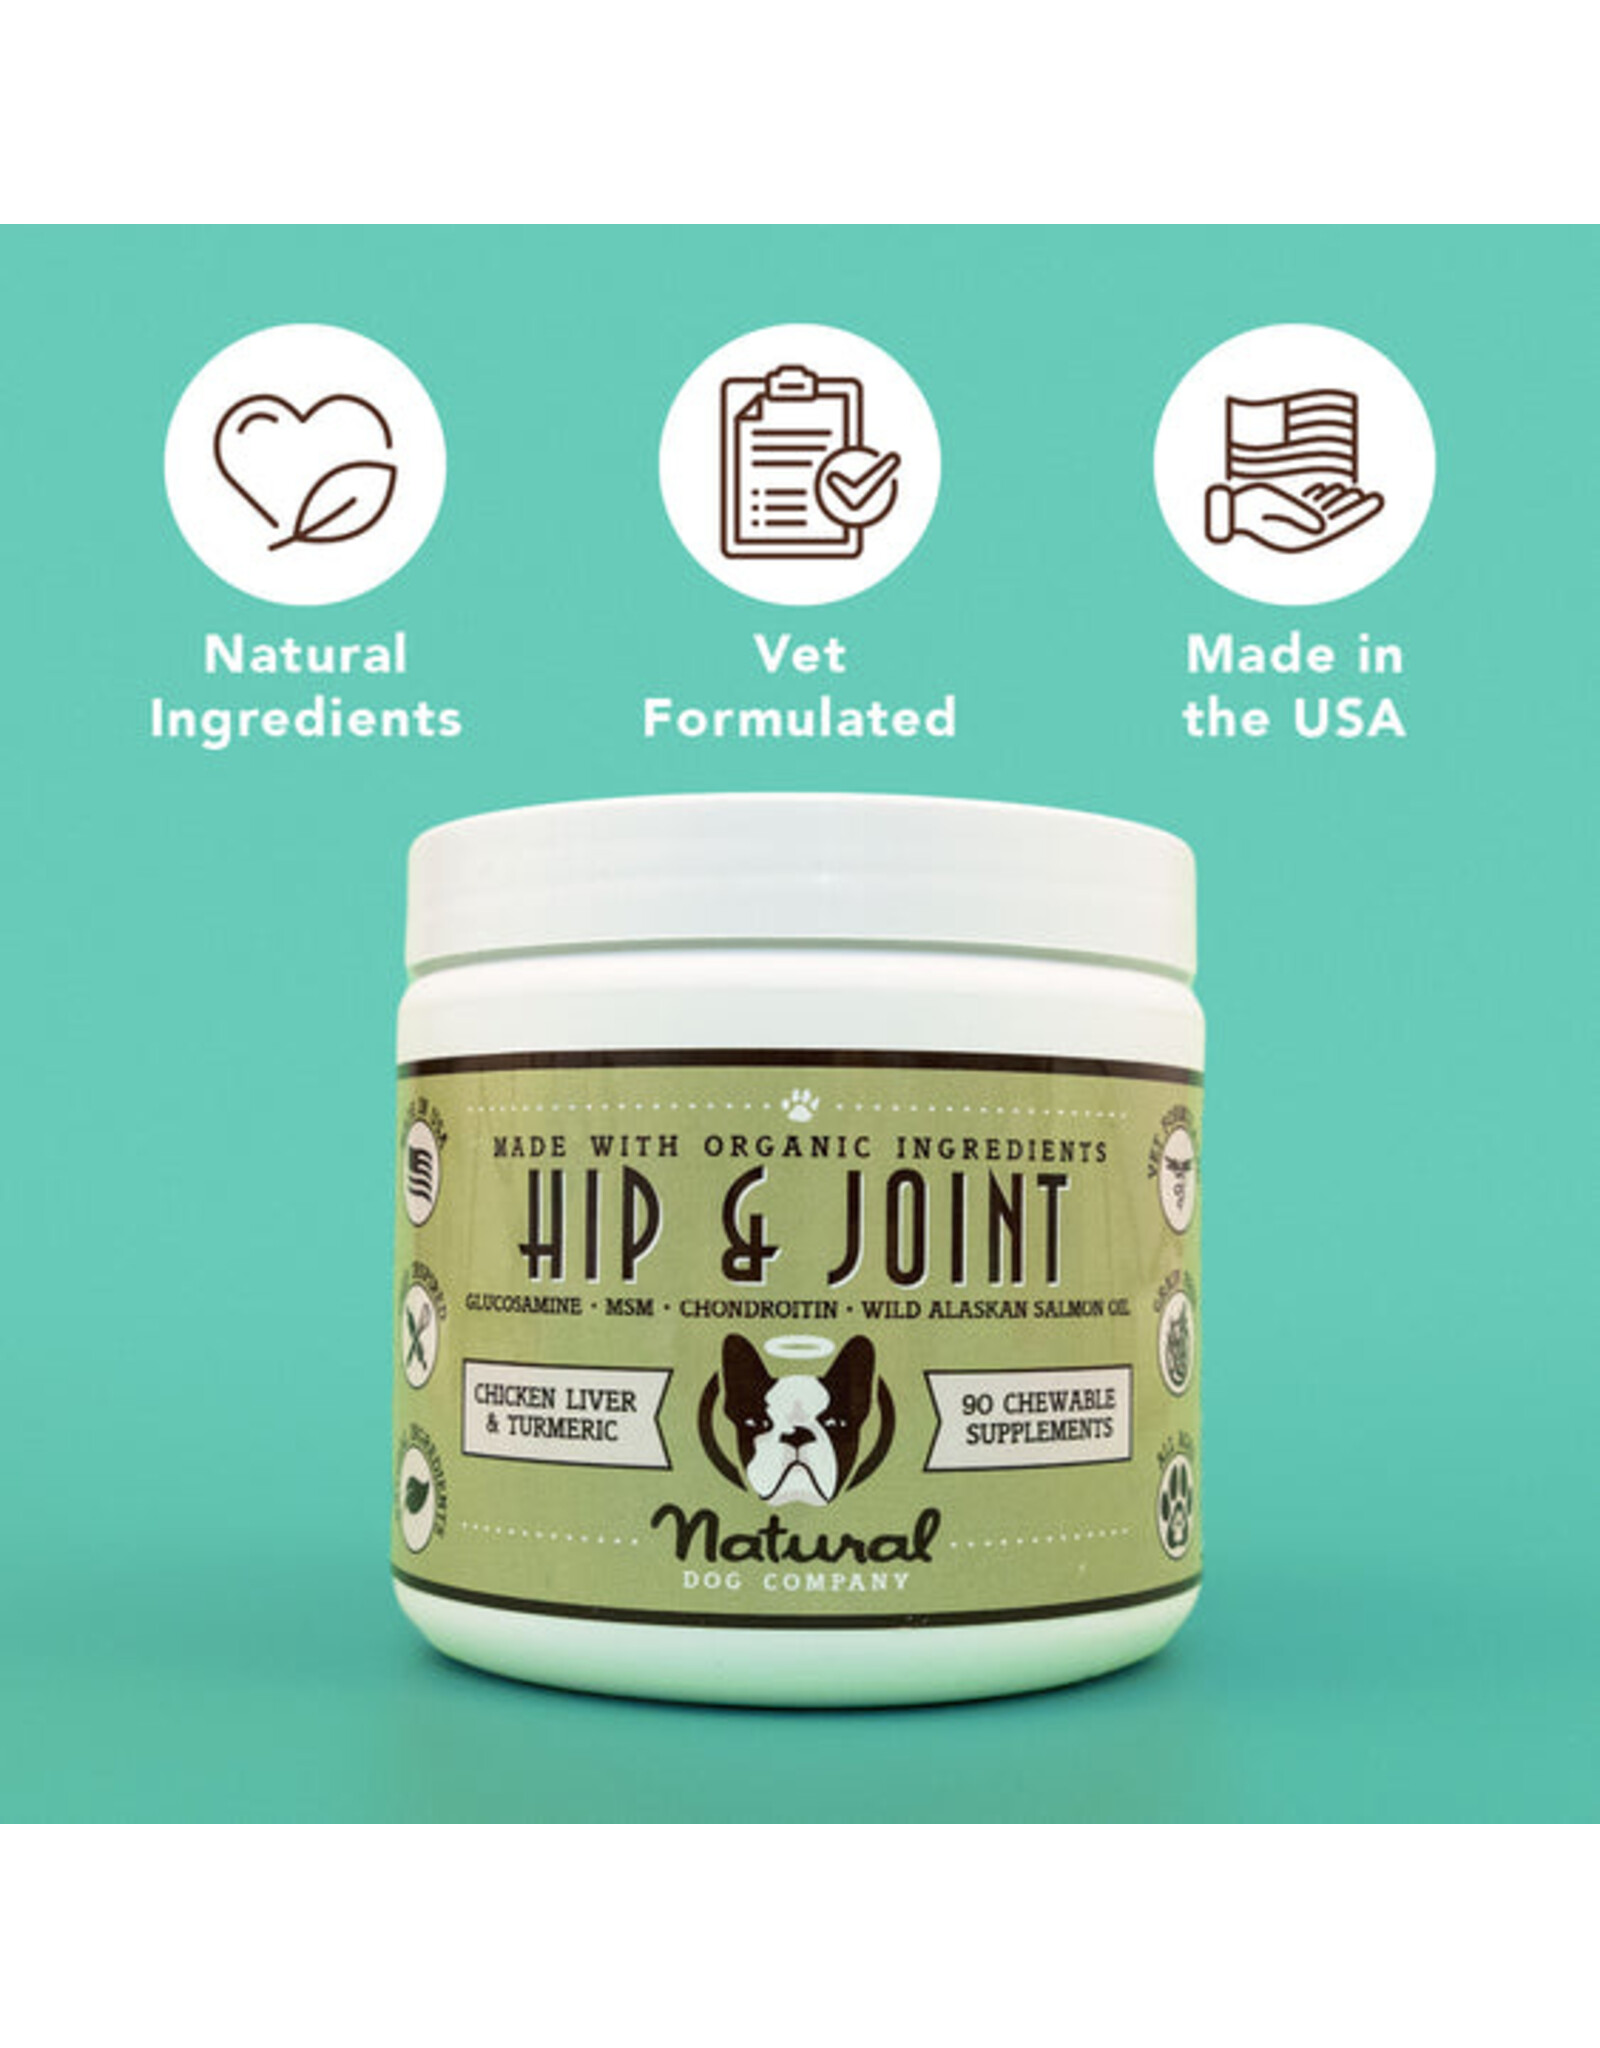 Natural Dog Co. Hip & Joint Supplement 90ct